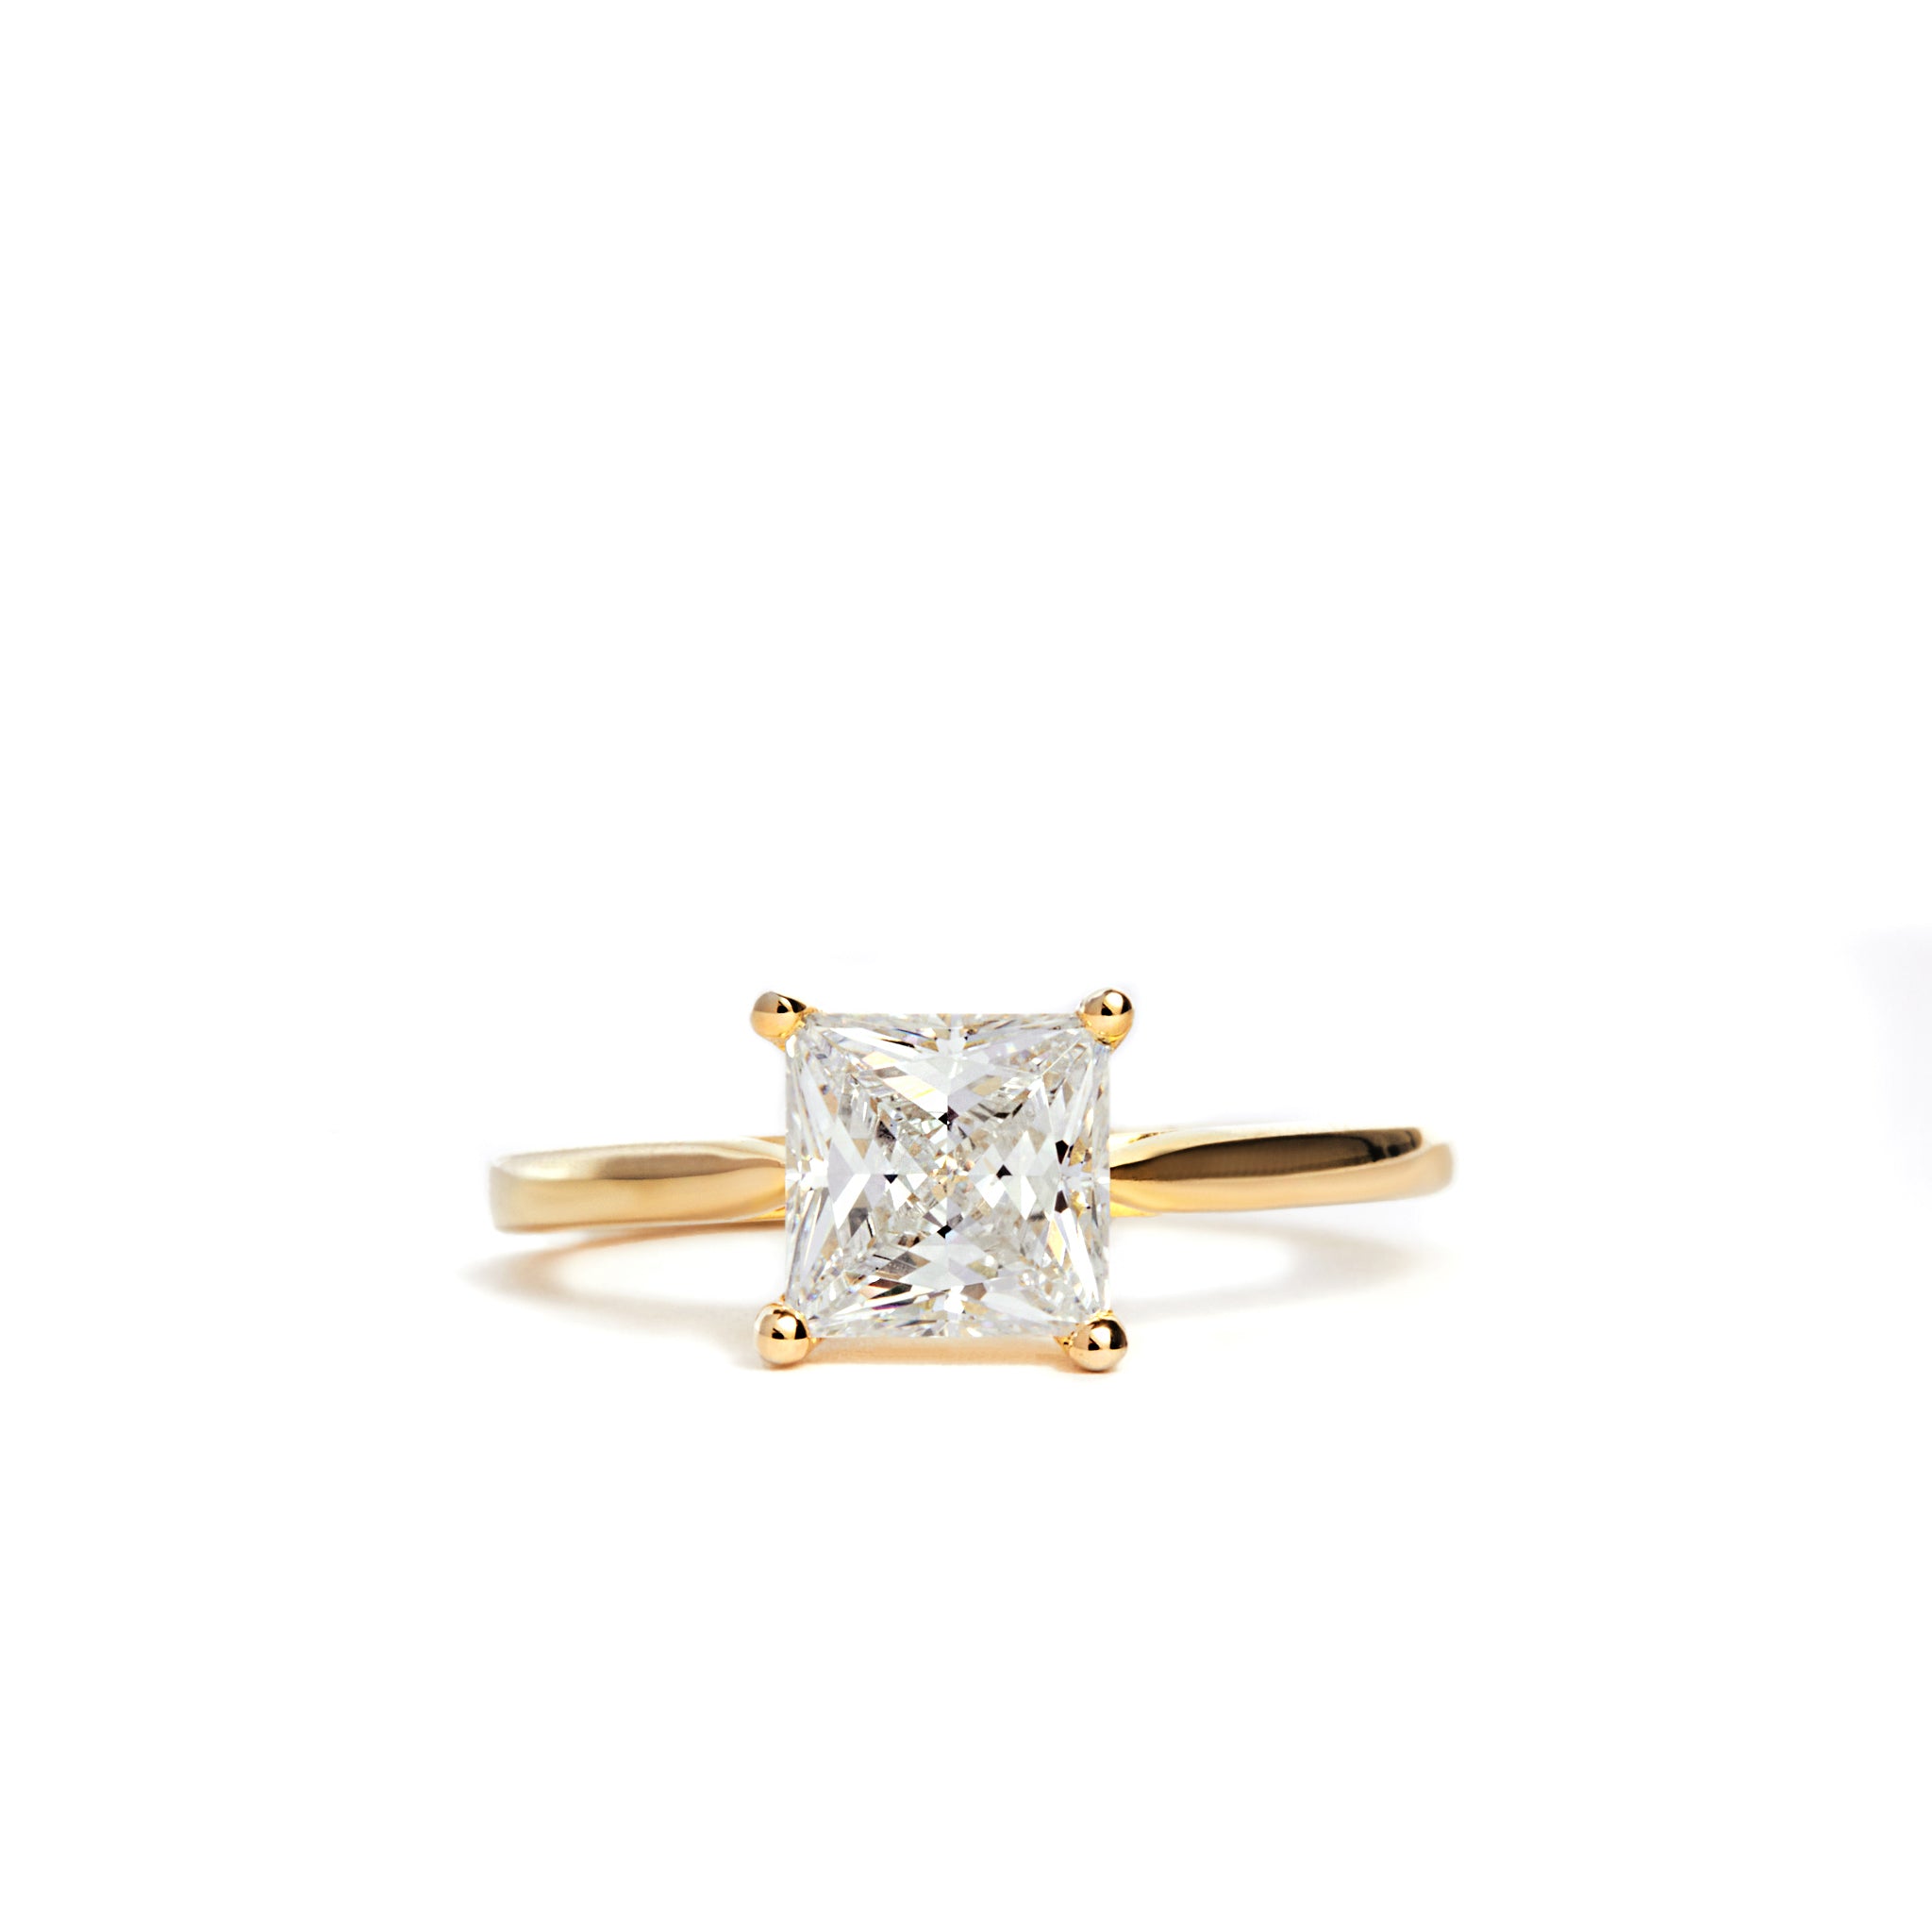 Stunning and elegant ring featuring a 1.50ct Princess Cut Lab Grown Diamond, available in multiple precious metals. 18ct Yellow Gold Band and Platinum options. D Colour, VVS1 Clarity. Made to Order